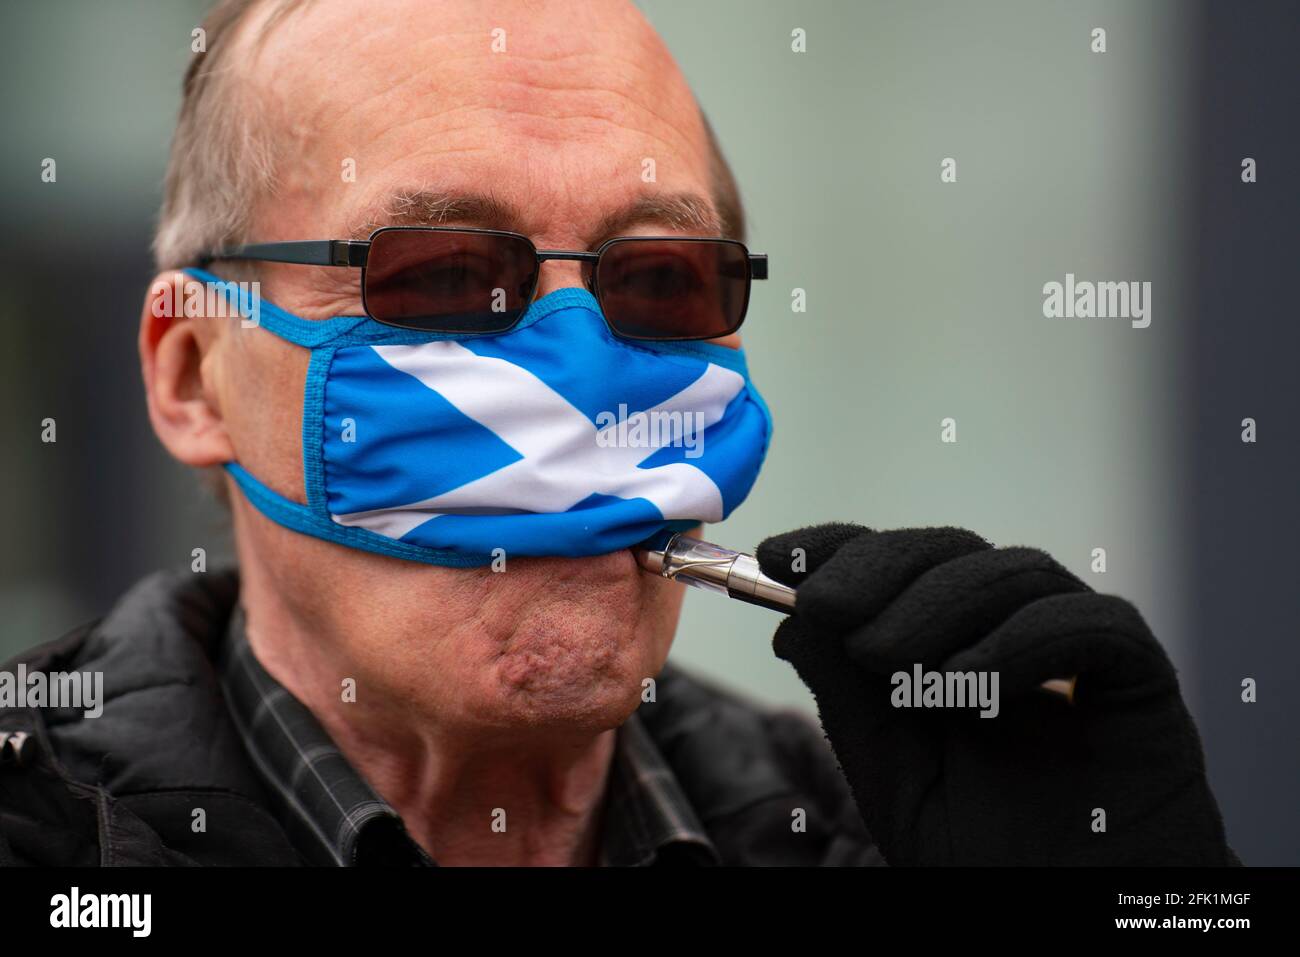 Dundee, Scotland, UK. 27 April 2021. Leader of Alba party Alex Salmond meets local Yes campaigners and supporters in Dundee, a heavily pro independence city today. Iain Masterton/Alamy Live News Stock Photo